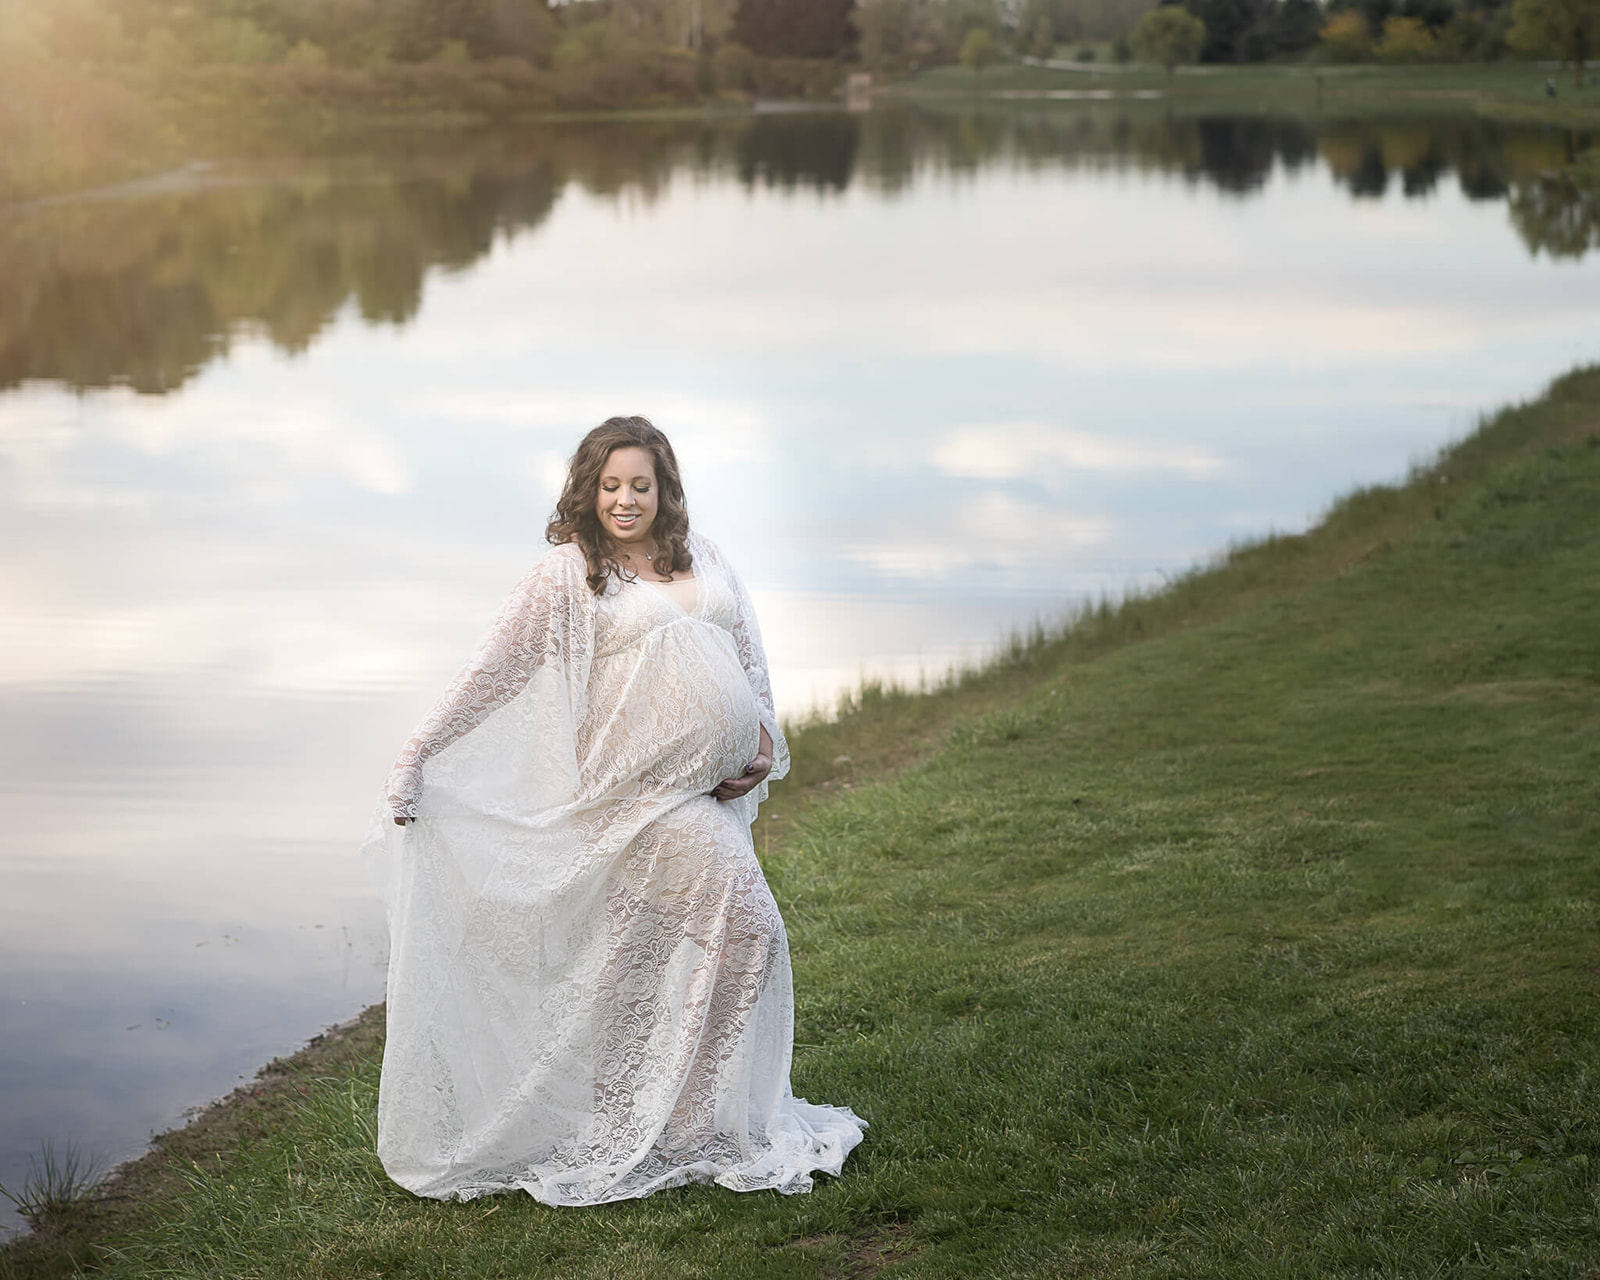 prenatal massage in akron oh in blog photo of pregnant woman in white dress